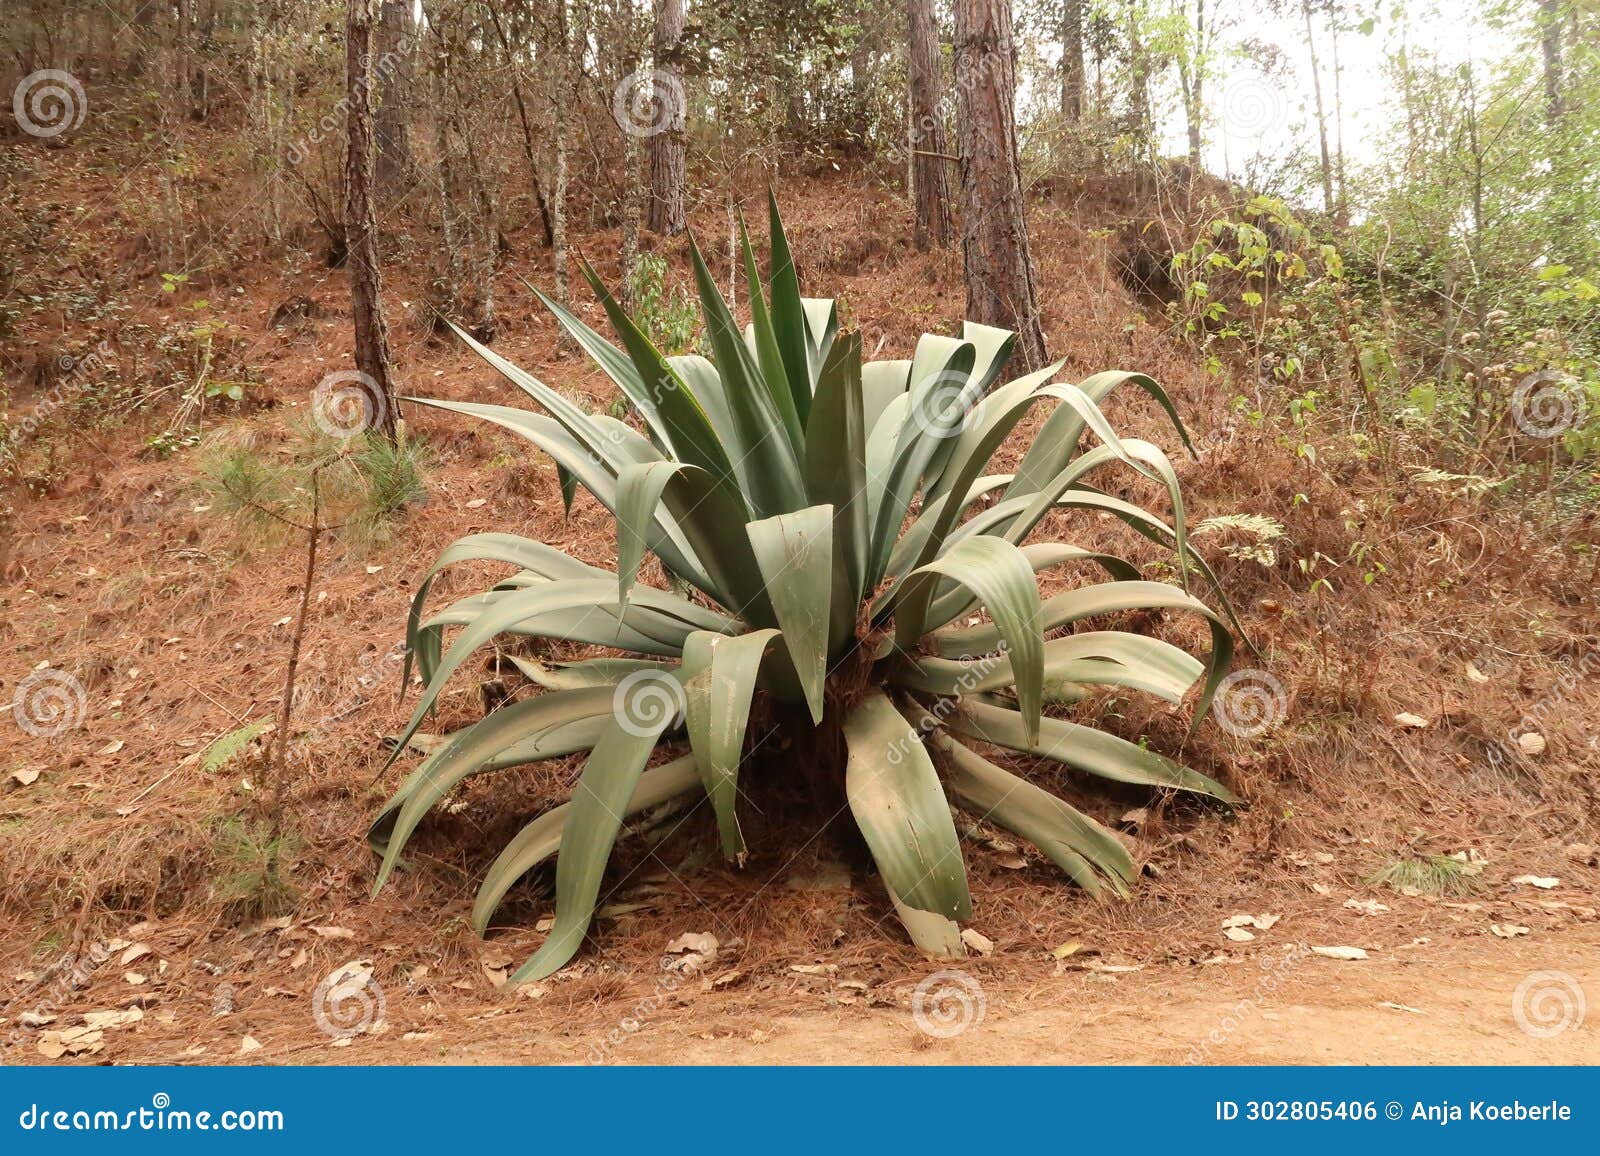 giant agave plant next to the road on a hike from san josÃ© del pacifico to san mateo rio hondo, oaxaca, mexico